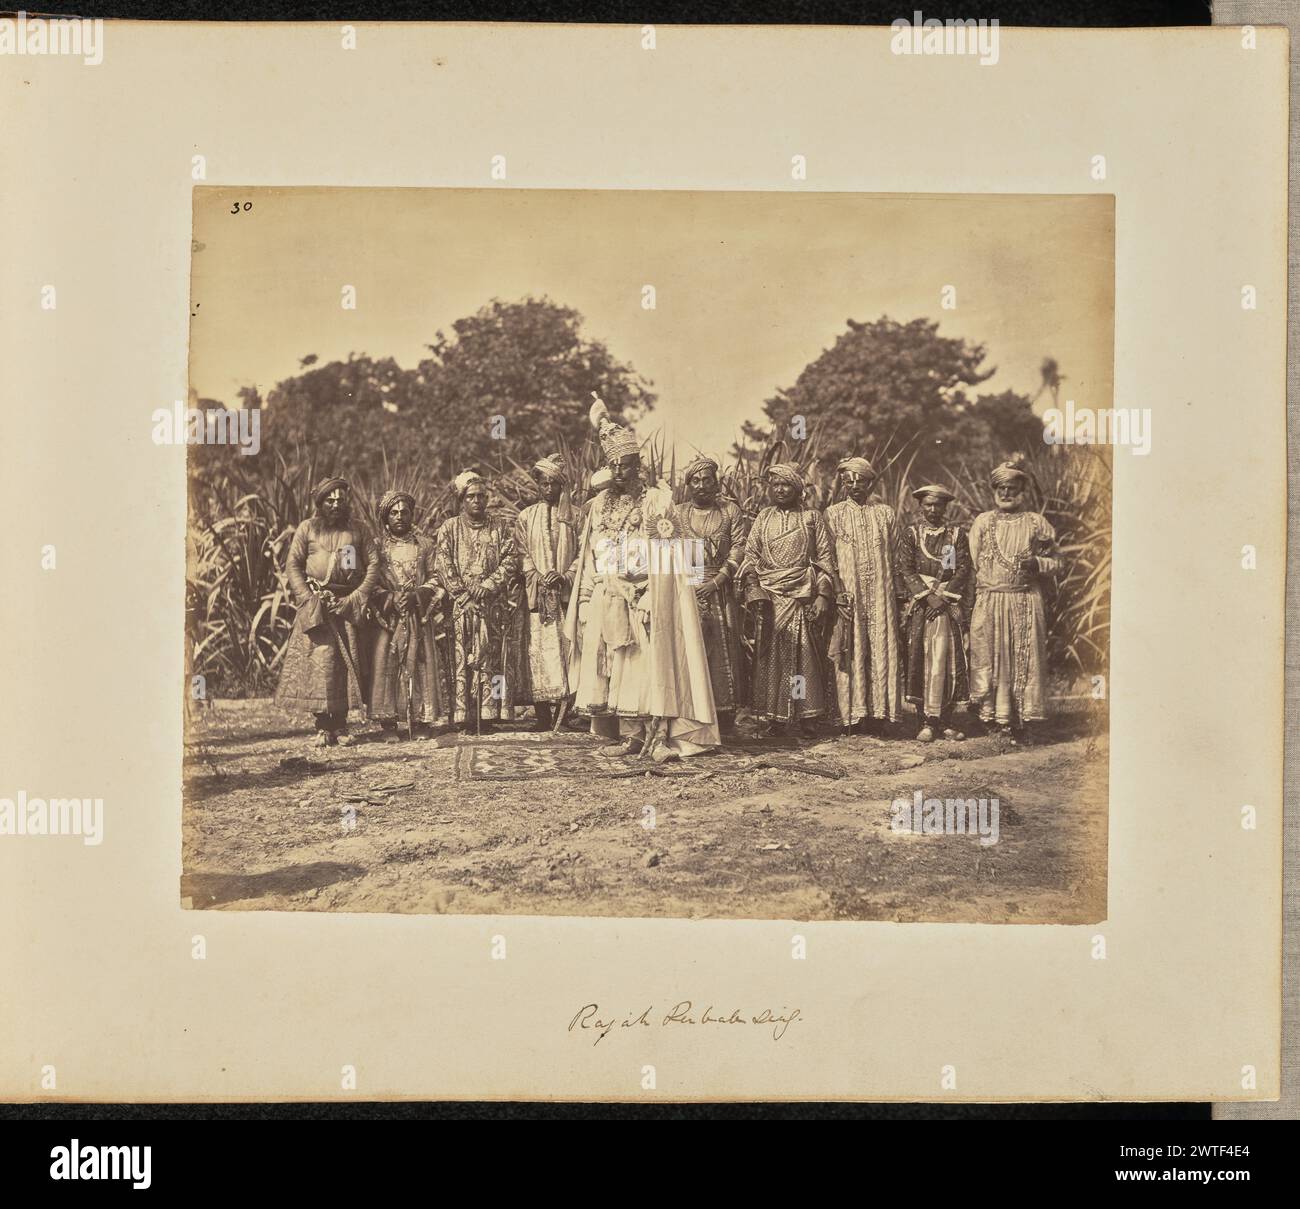 Rajah Rubab Sing. Unknown, photographer about 1866–1870 Group portrait of a ruler of an Indian princely state, possibly Maharaja Raghuraj Singh, the Maharaja of Rewa, and his retinue in an outdoor setting. The Maharaja wears a glittering crown and the mantle of the Order of the Star of India. (Recto, print) upper left, in black ink: '30'; (Recto, mount) lower center, in brown ink: 'Rajah Rubab Sing.'; (Verso, mount) lower left, in pencil: 'A48.76'; Stock Photo